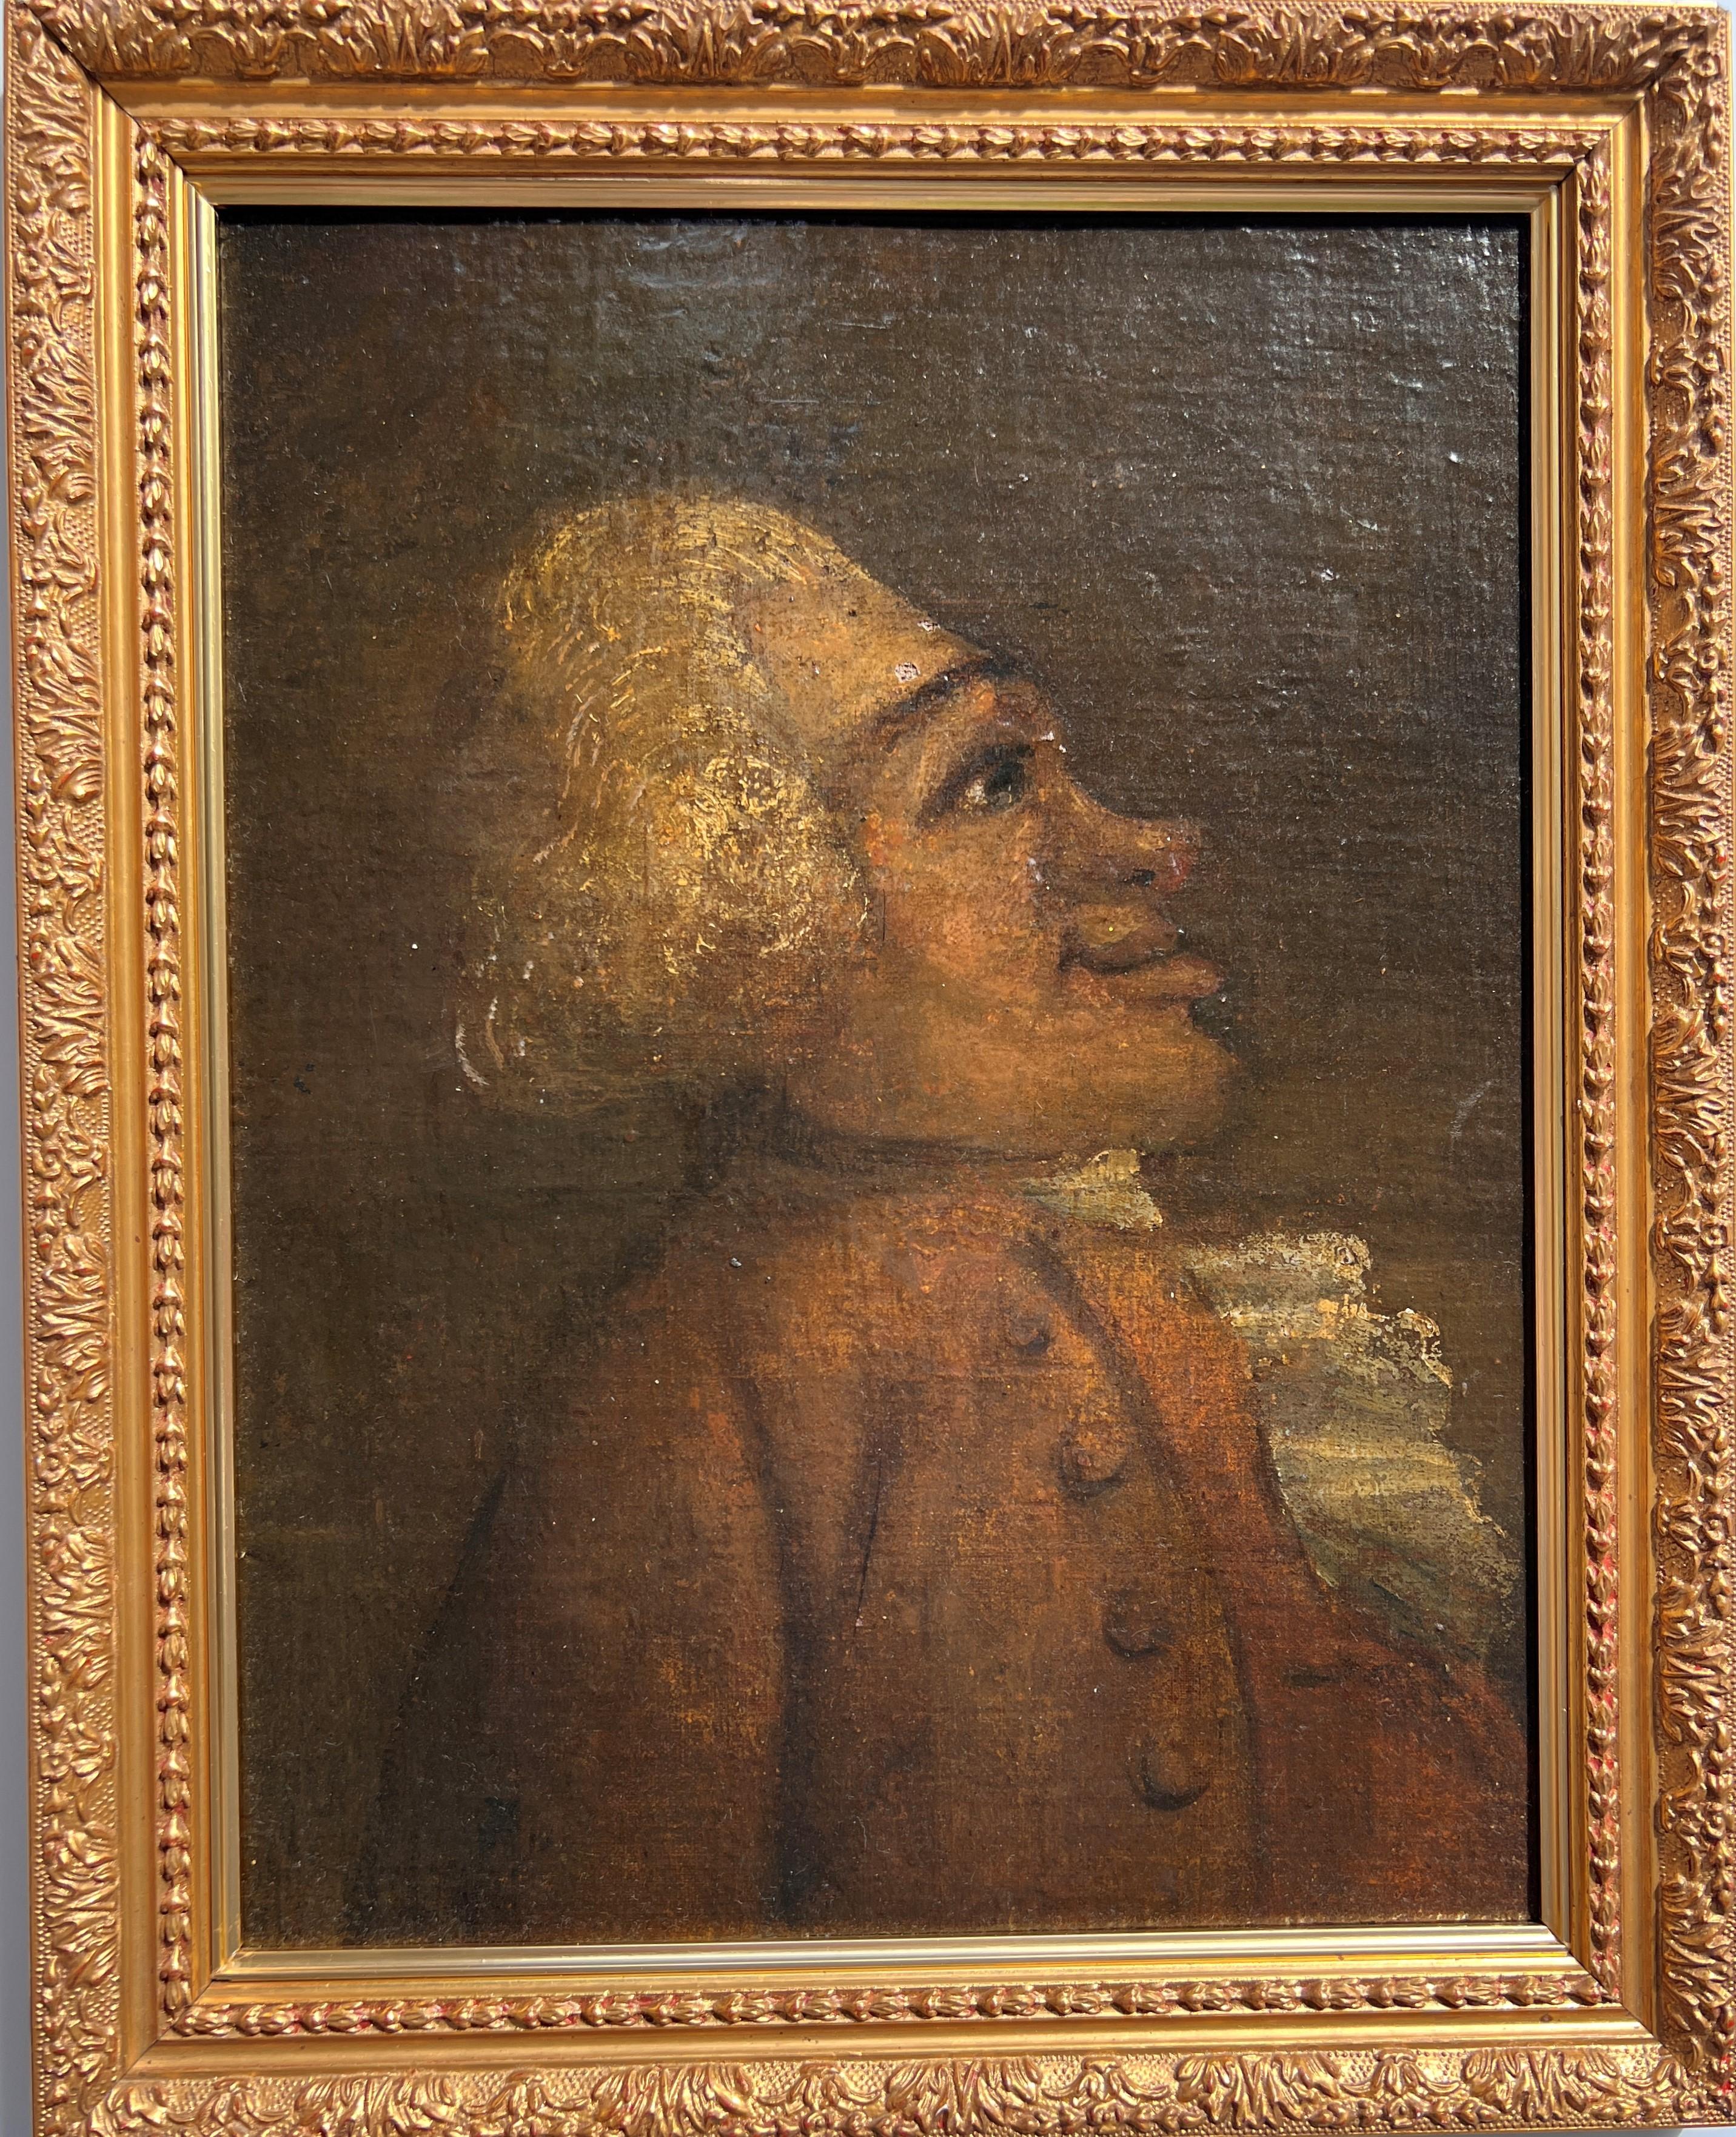 Up for sale is an unusual unique antique 18-century  original oil painting on board depicting a figure of a gentleman wearing a white wig and dressed in a red jacket and white jabot, typical of the period. His face is almost comical in its